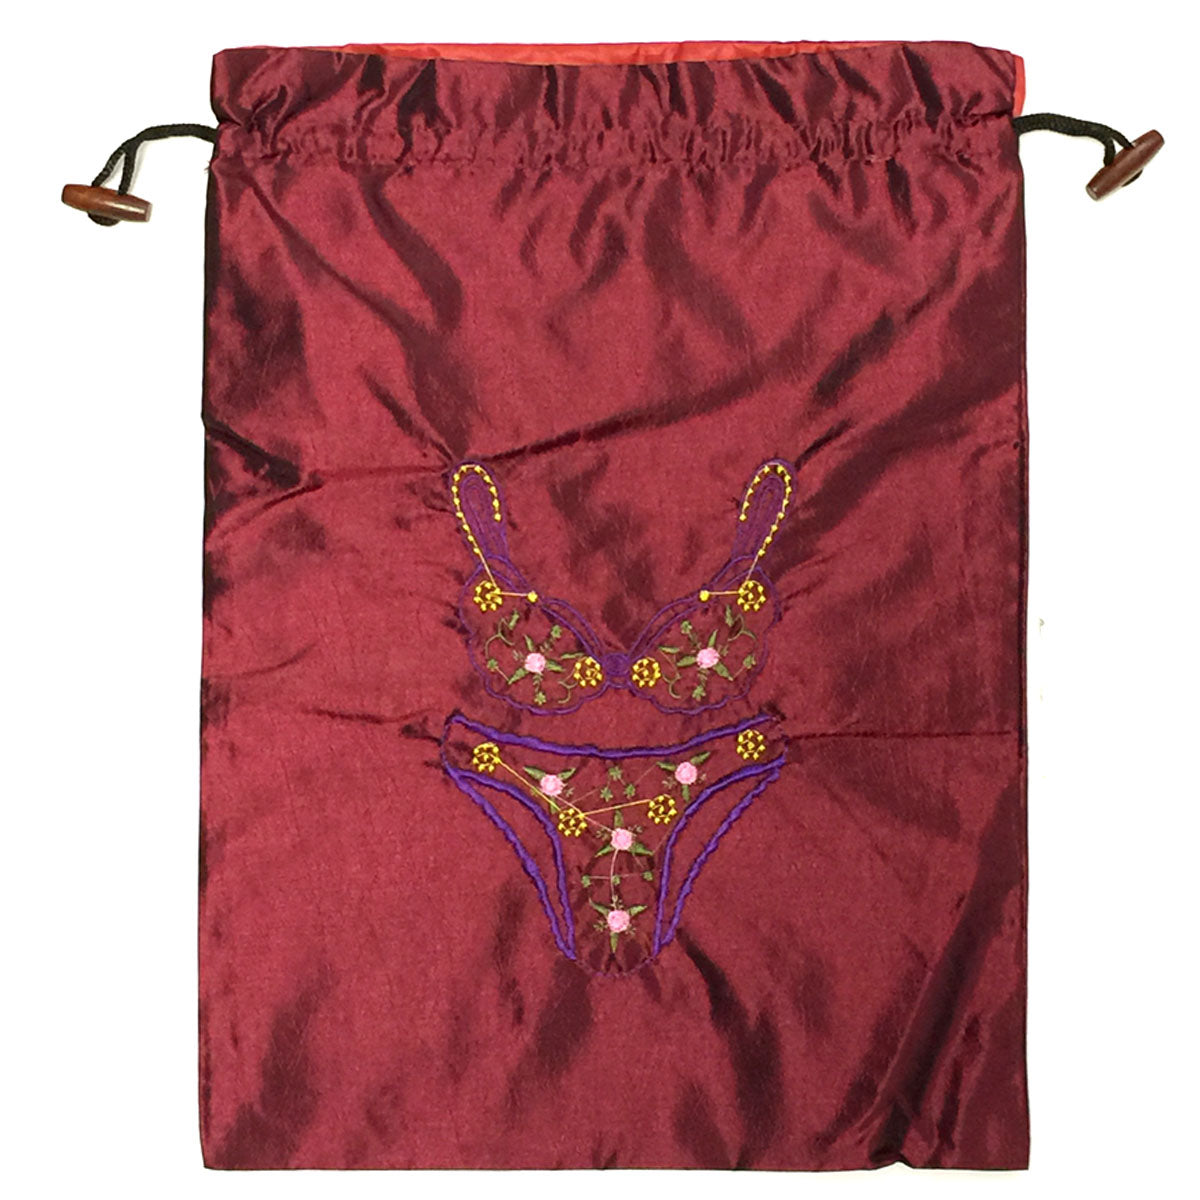 Wrapables Silk Embroidered "Bra & Panties" Lingerie Bag